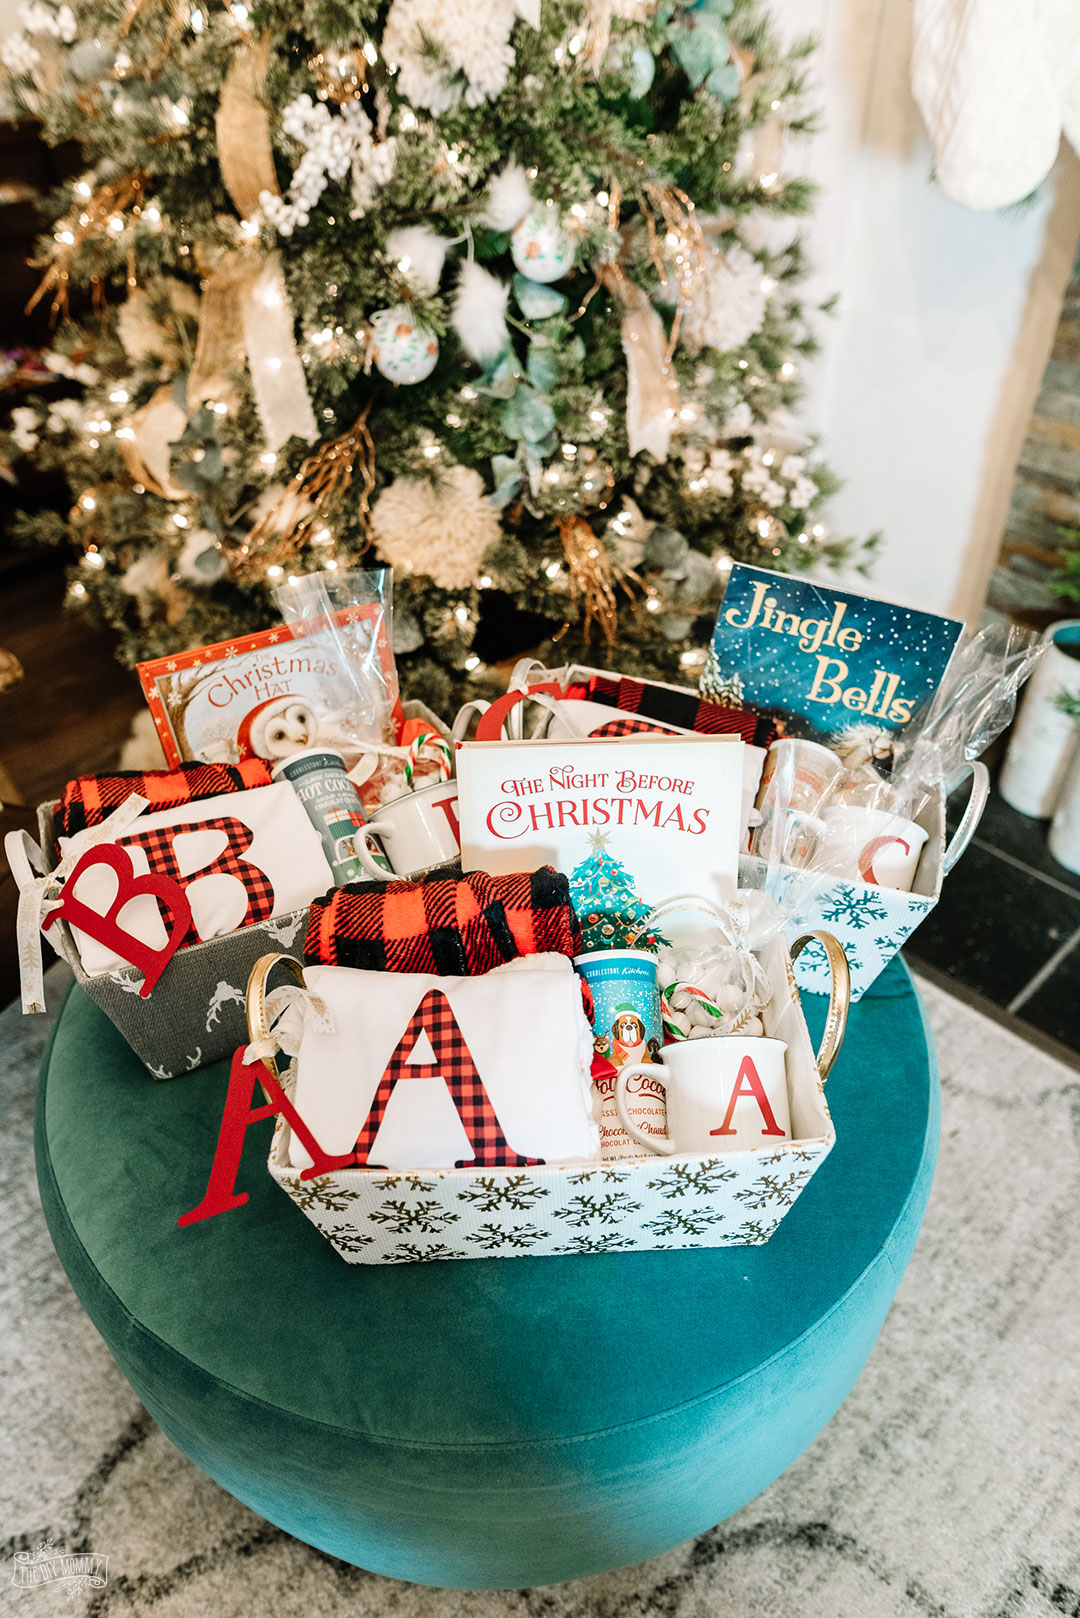 Personalize this Christmas Eve box filled with PJ's, books, hot chocolate, mug and candy canes for each of your family members. 